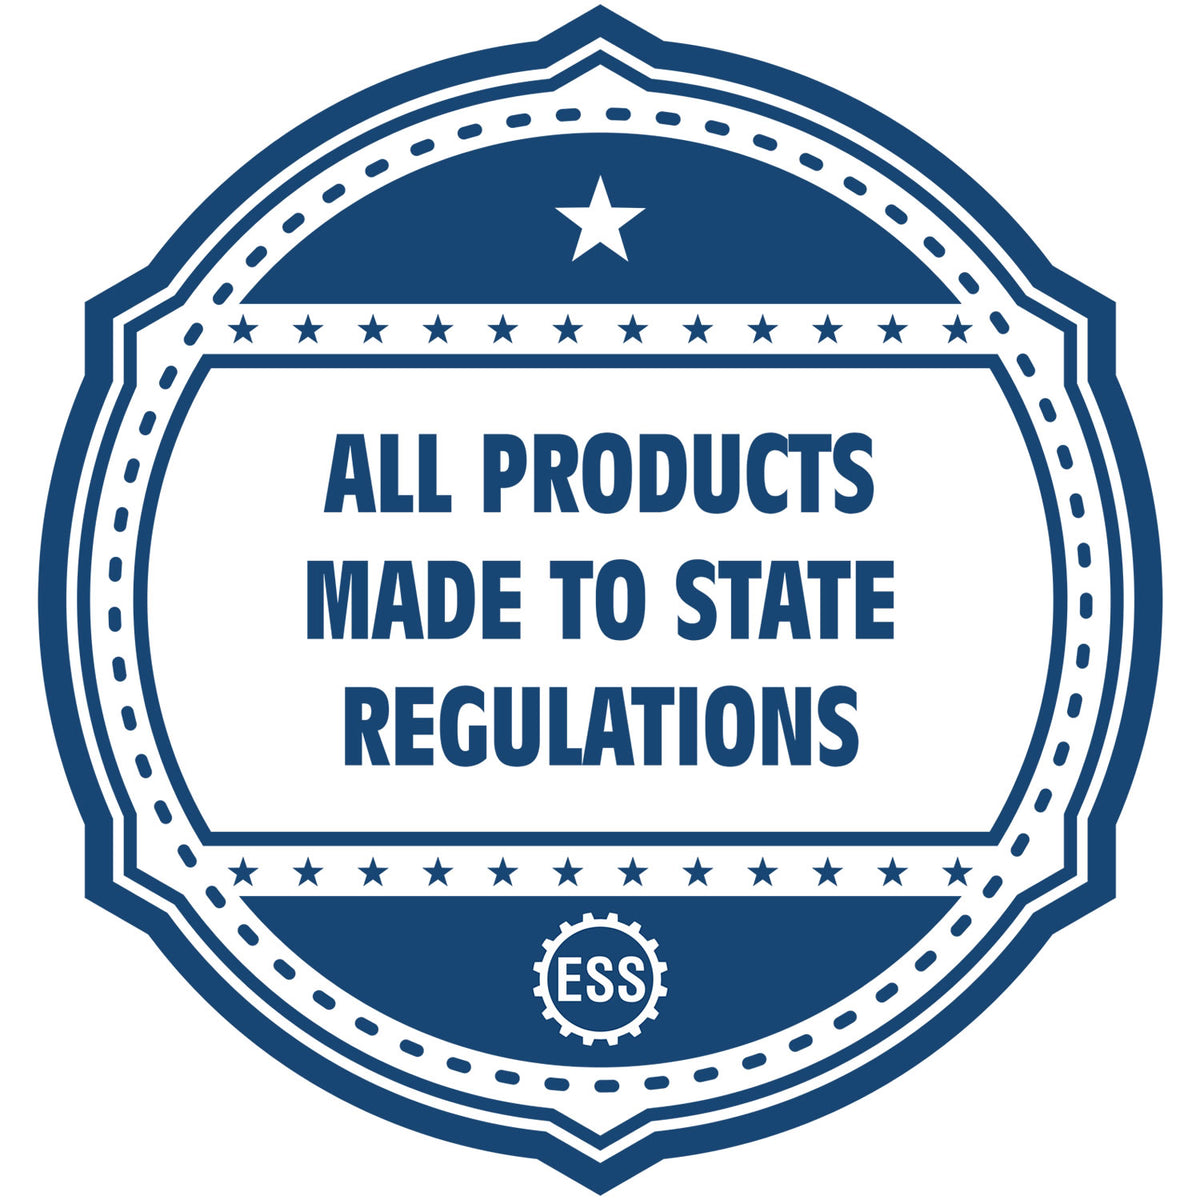 An icon or badge element for the Slim Pre-Inked State Seal Notary Stamp for Vermont showing that this product is made in compliance with state regulations.